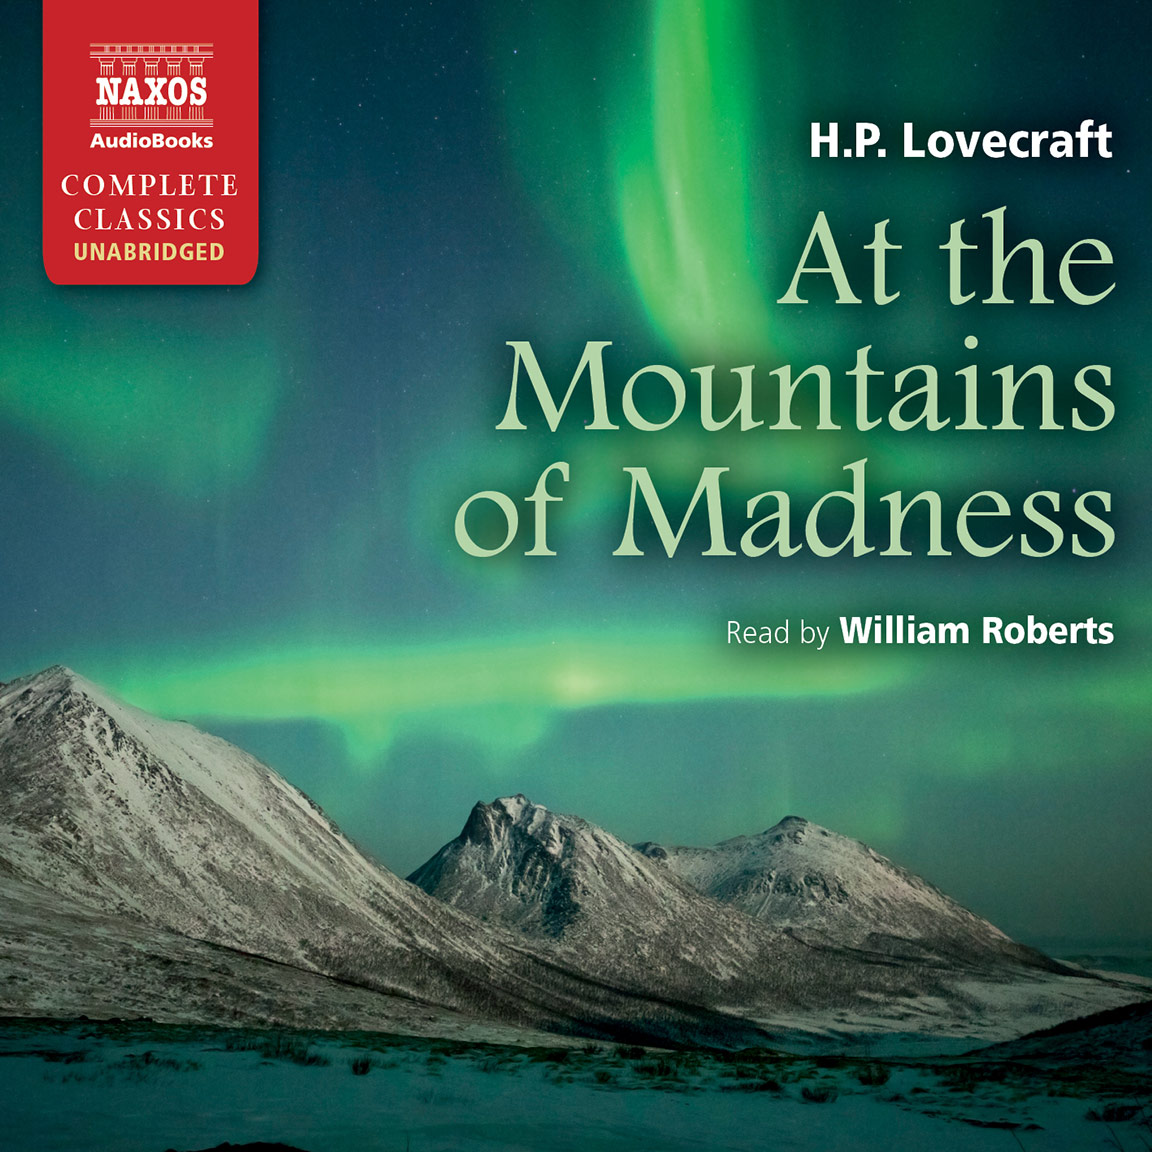 At the Mountains of Madness (unabridged)